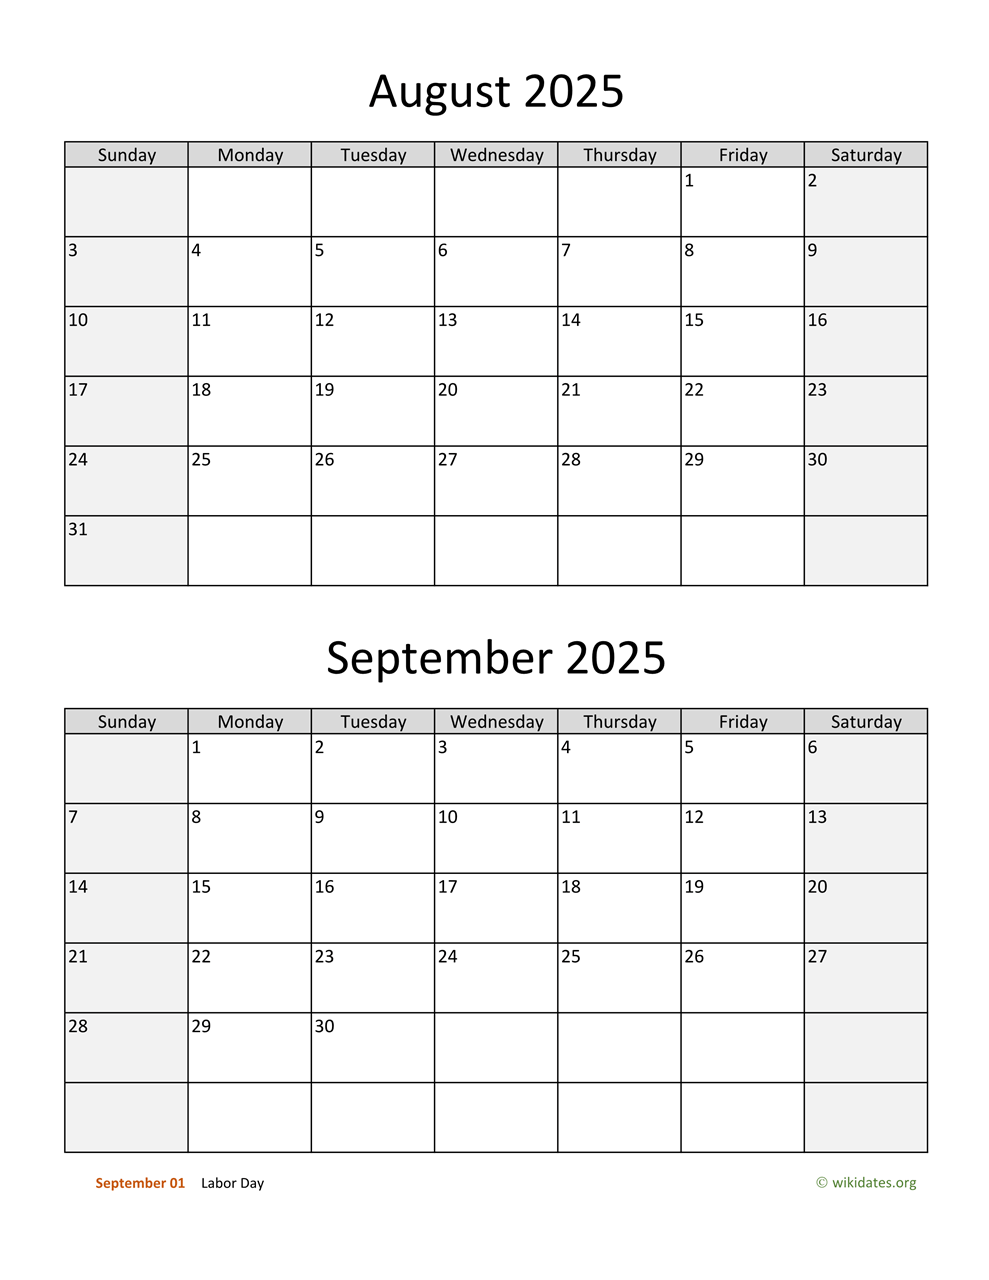 august-2025-calendar-with-weekend-shaded-wikidates